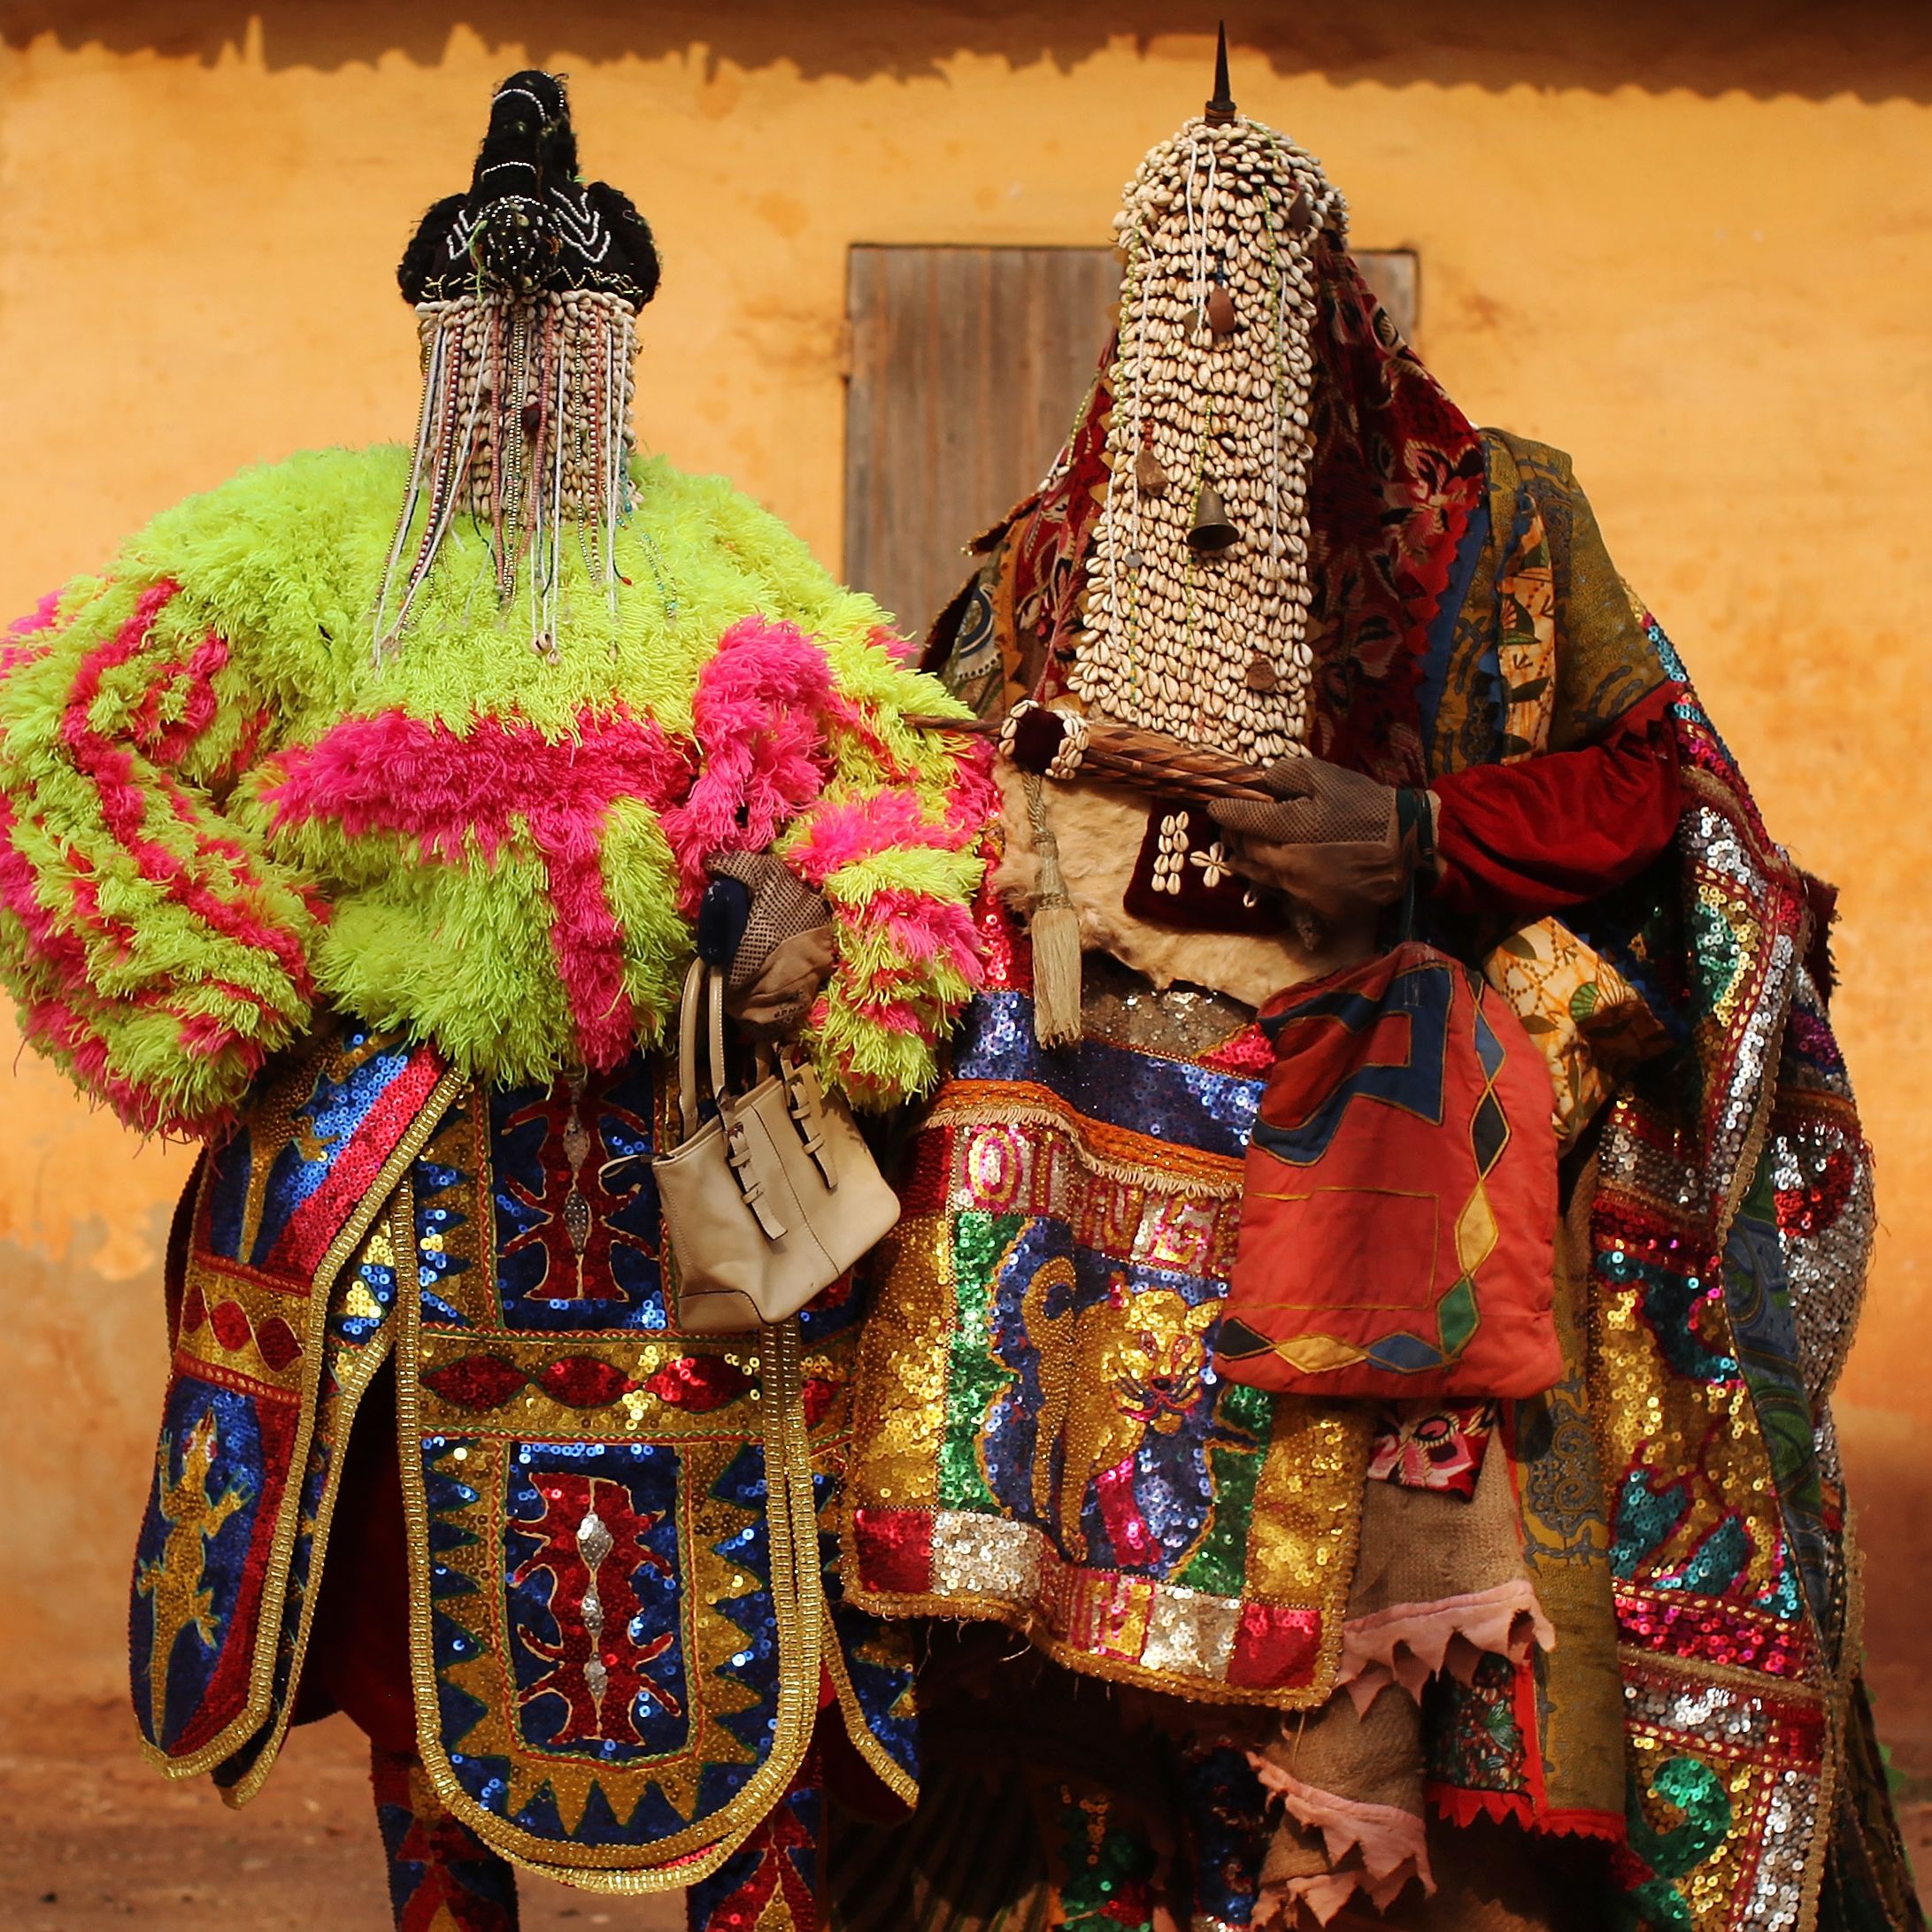 Voodoo dances and mystic trances: Five African festivals to see | CNN